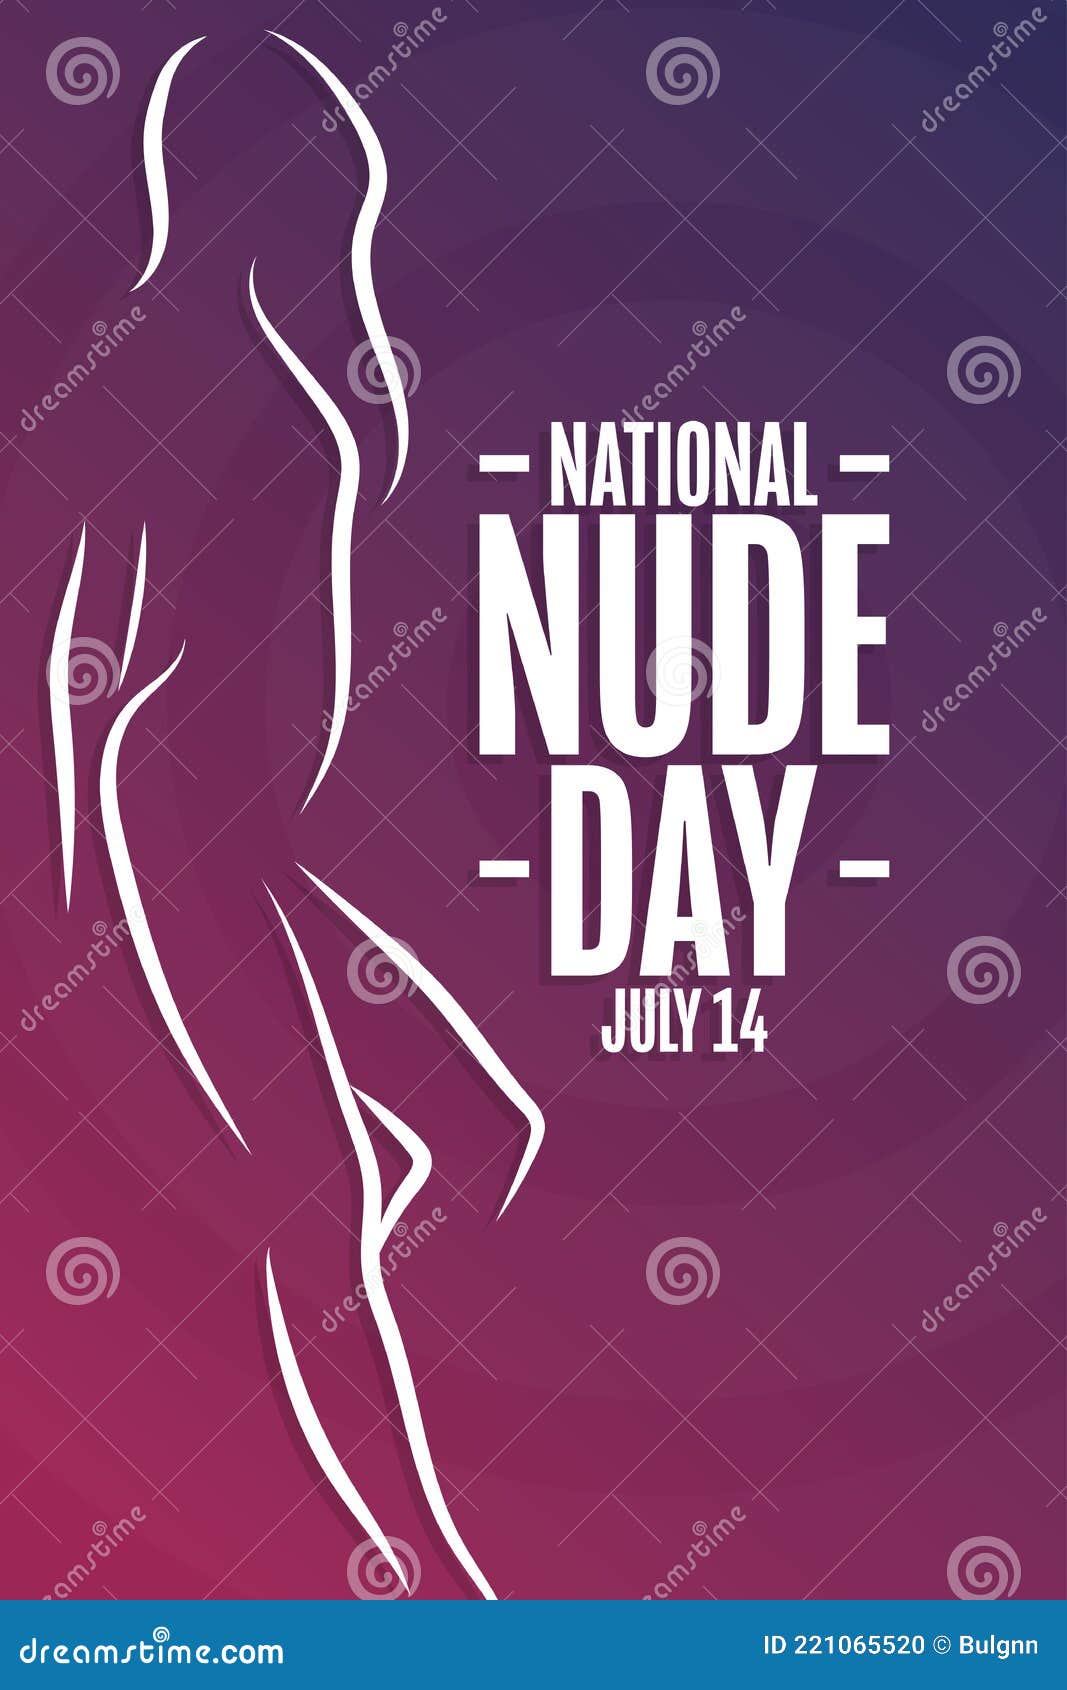 Best of Send nude day